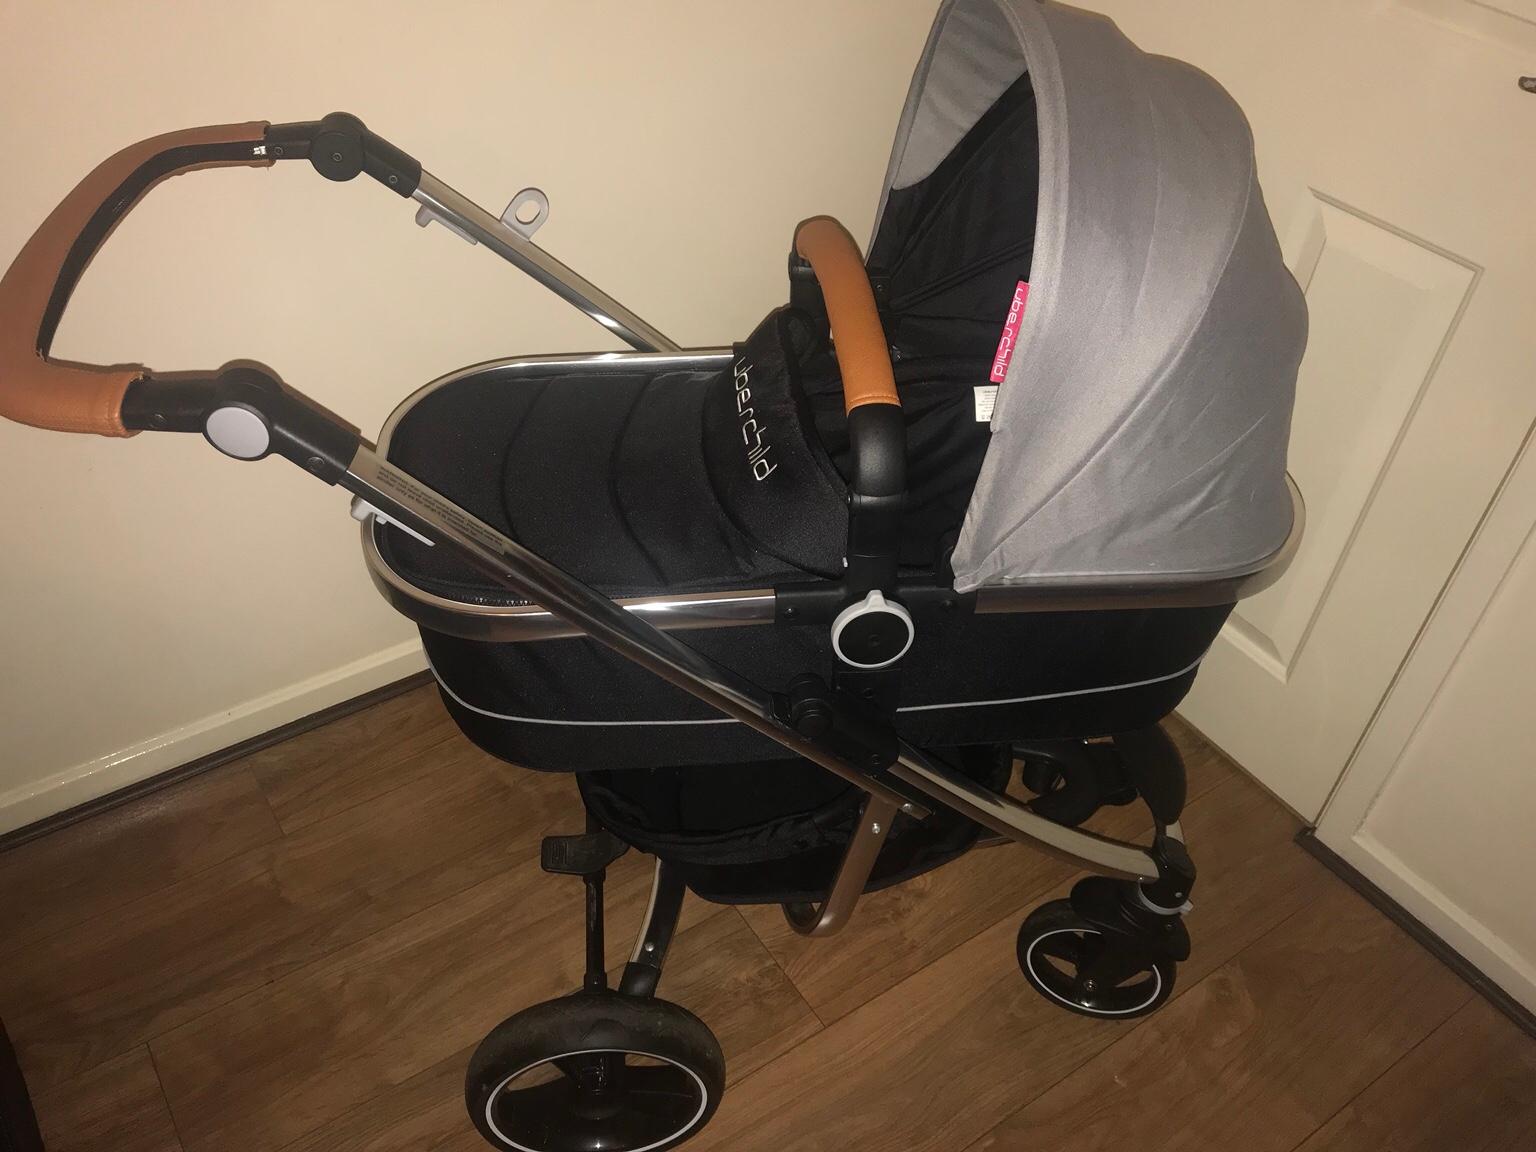 infababy flo 3 in 1 review